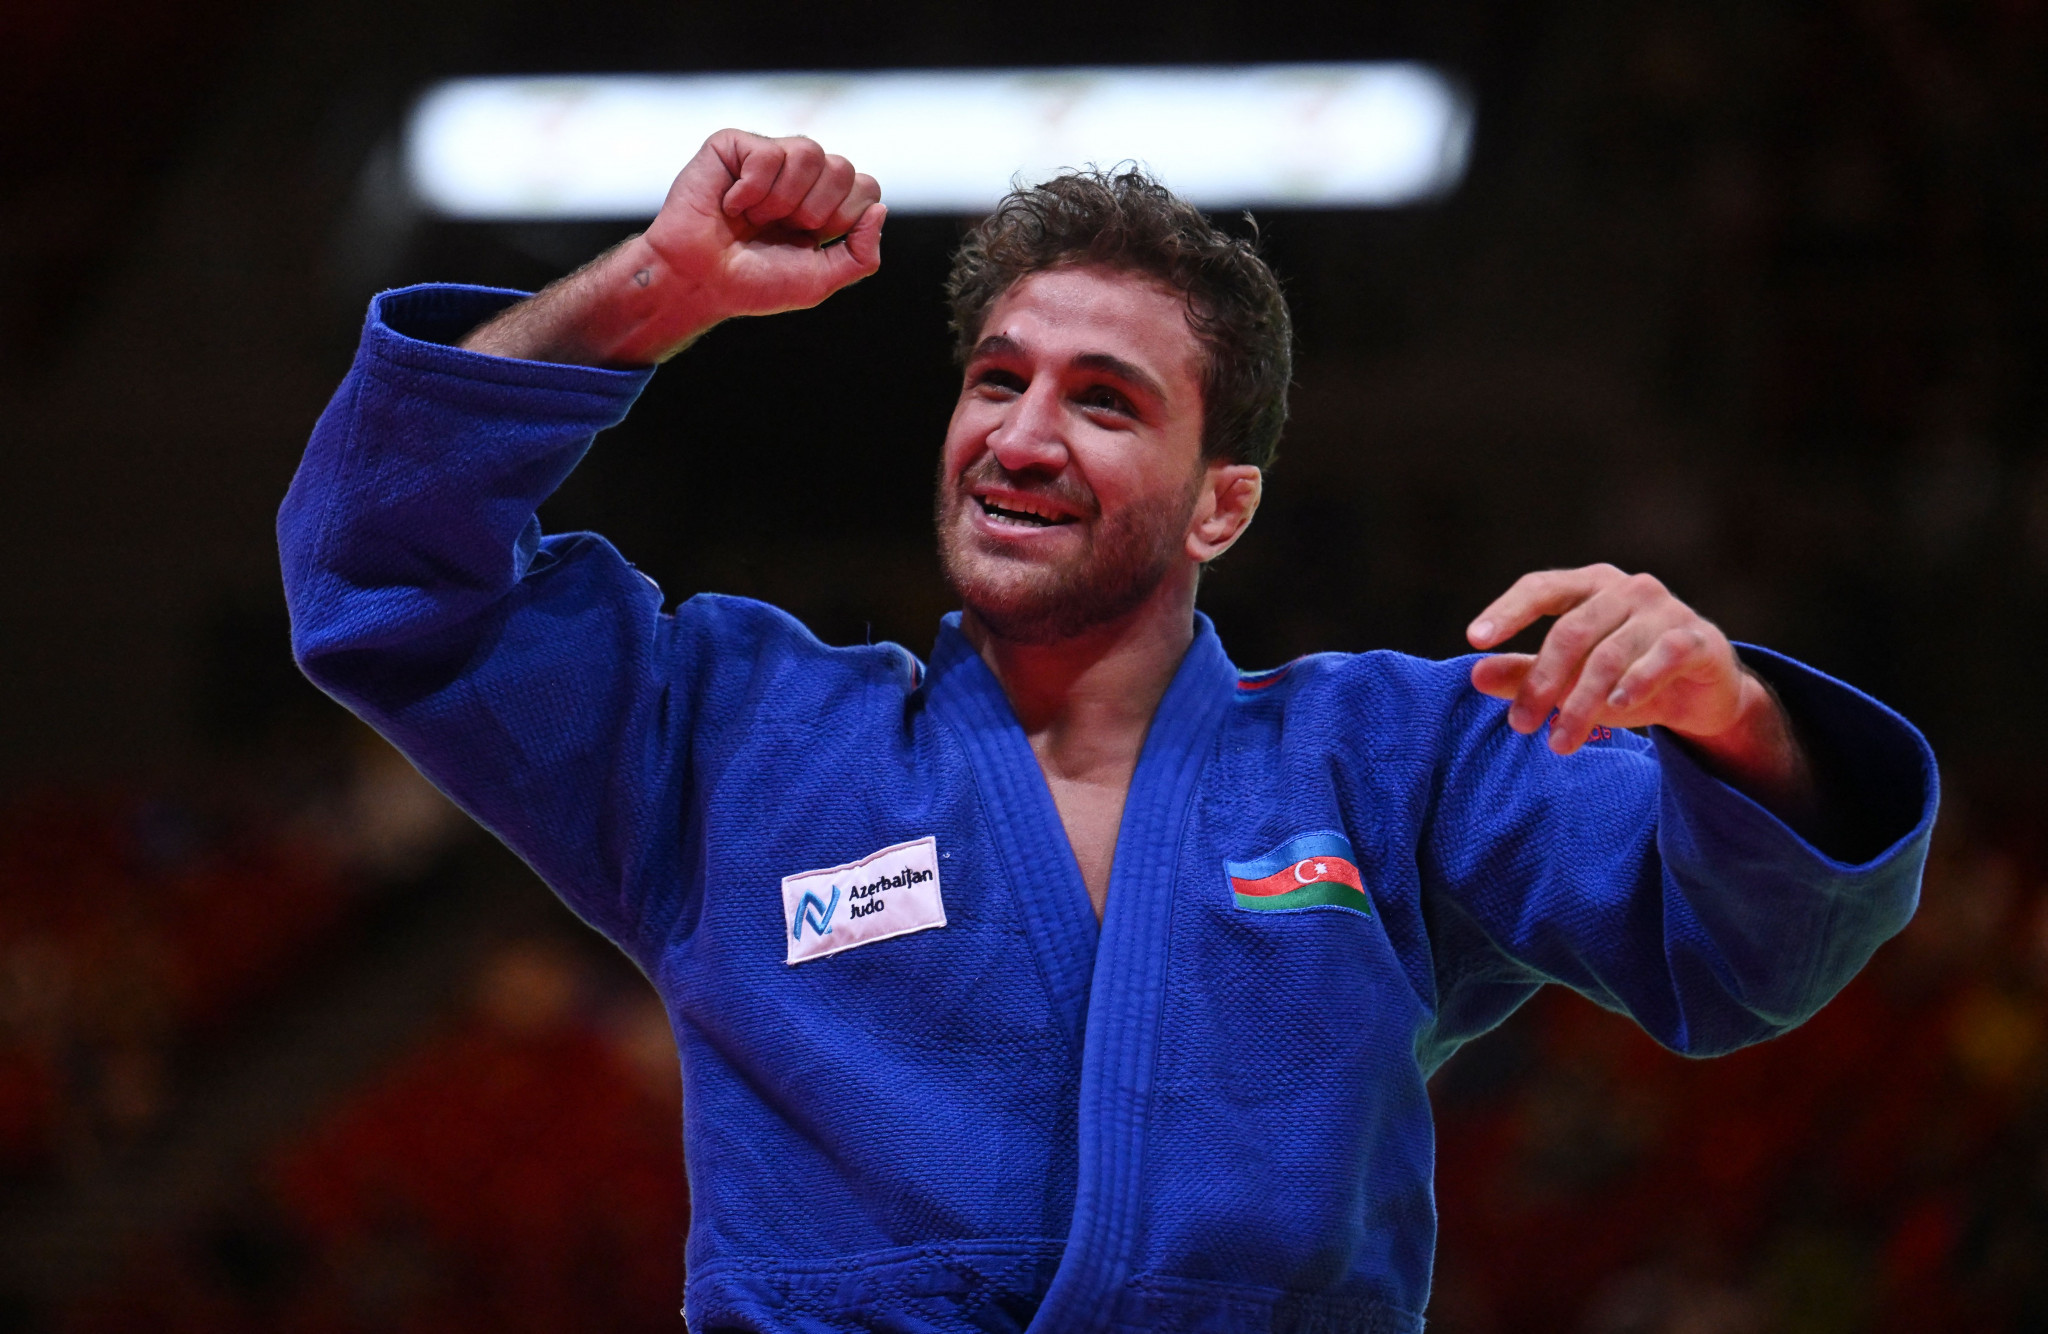 Hidayat Heydarov provided one of two victories for Azerbaijan on day two of the IJF Grand Slam in Baku ©Getty Images